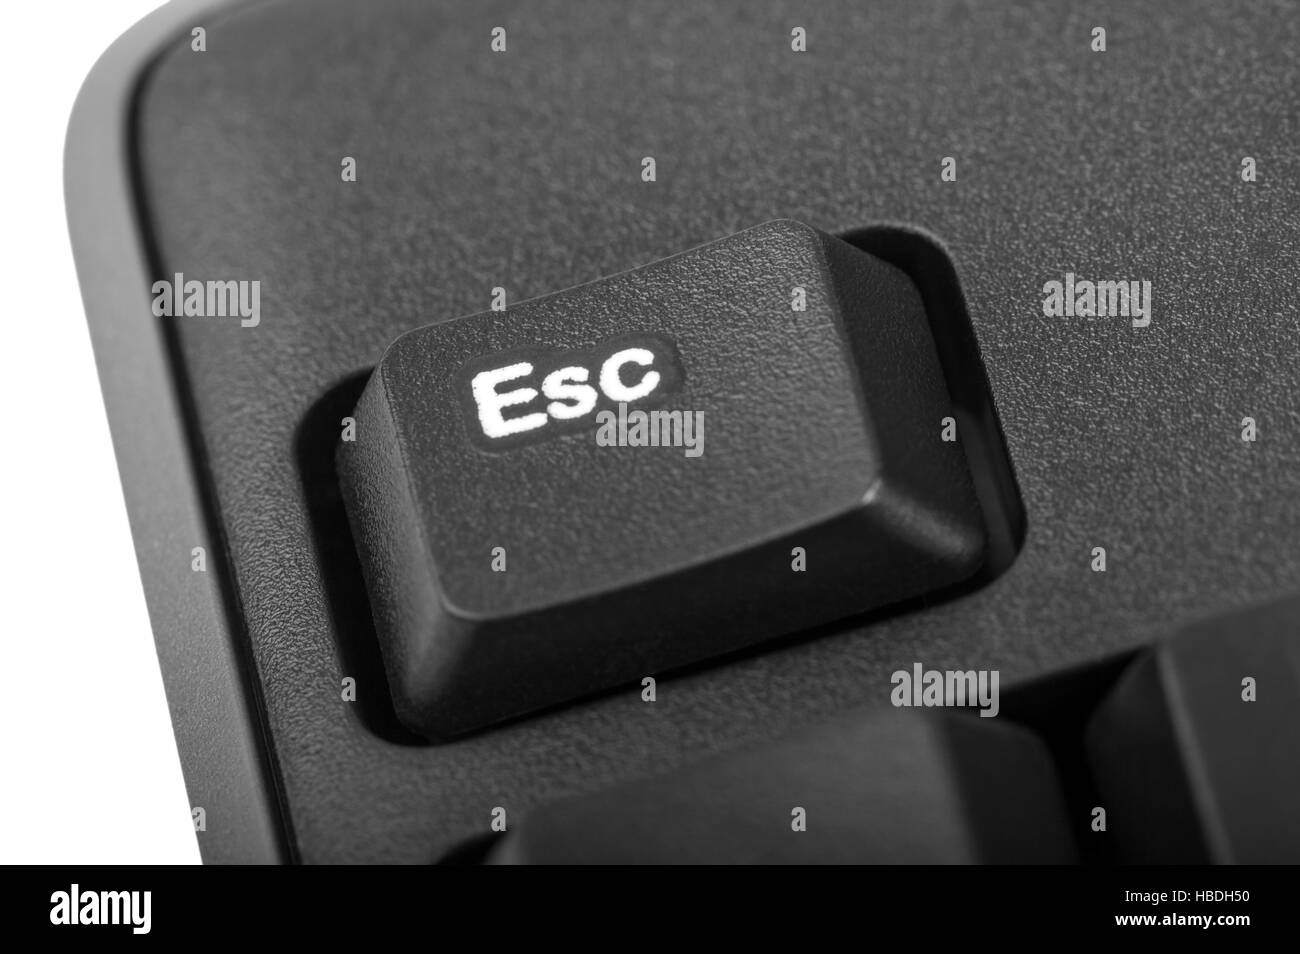 Electronic collection - detail black computer keyboard with key esc Stock Photo